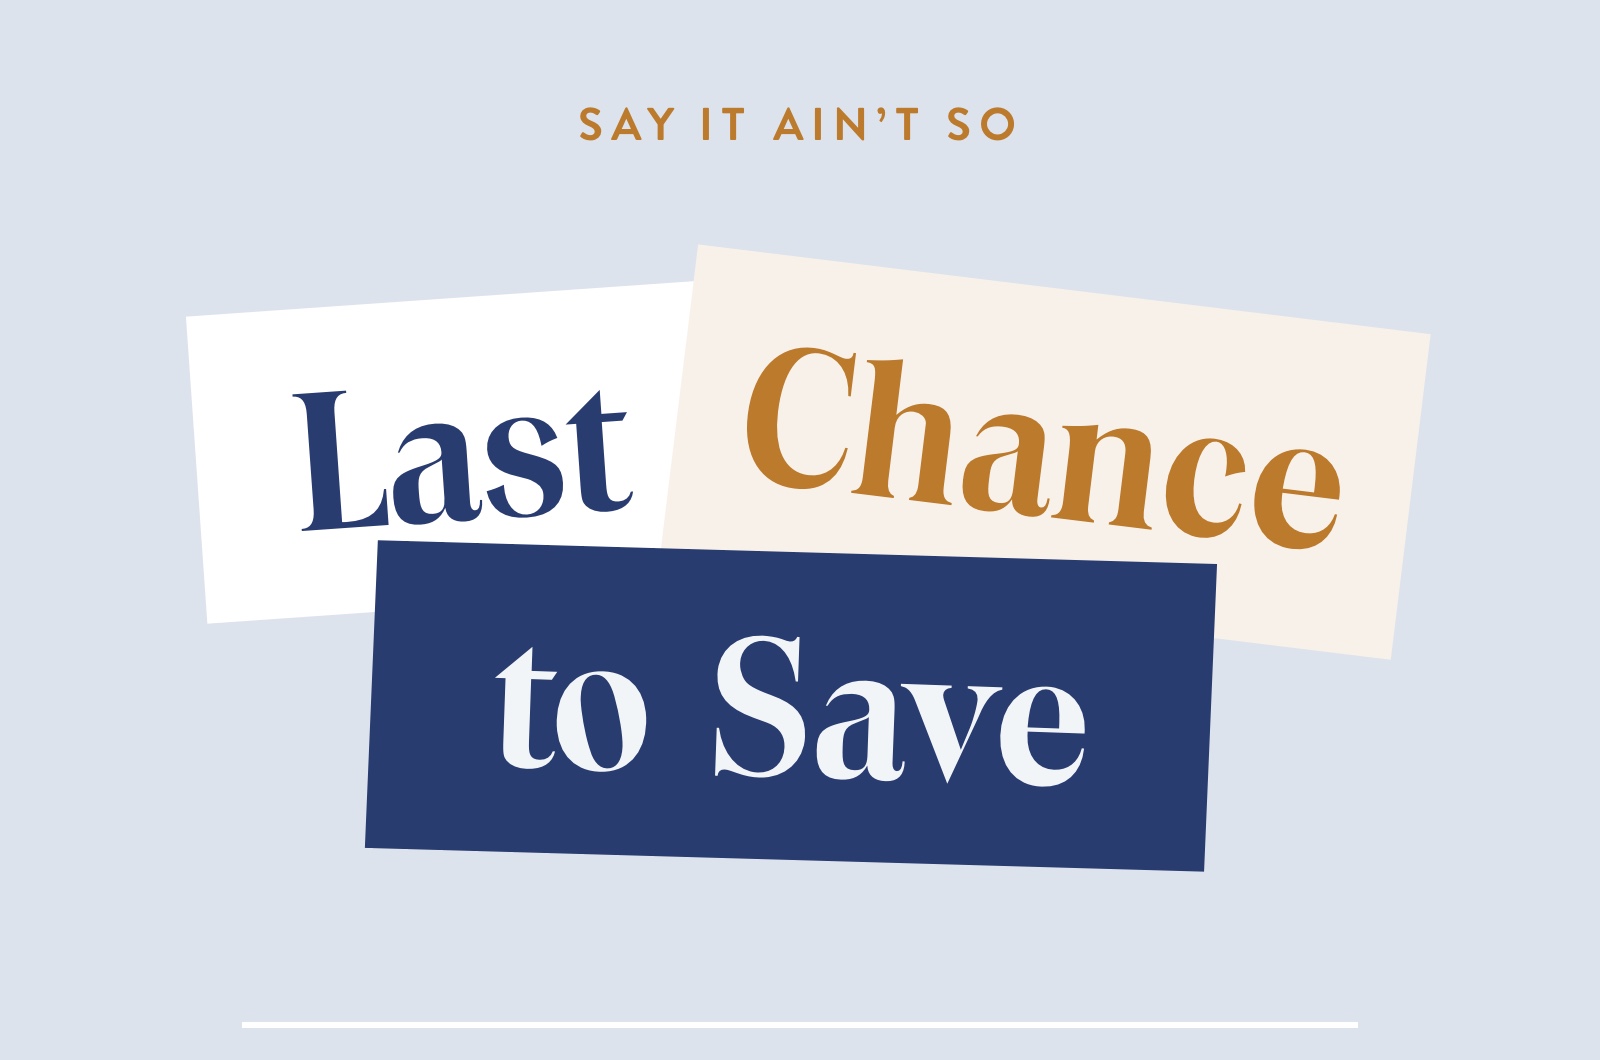 Last Chance to Save